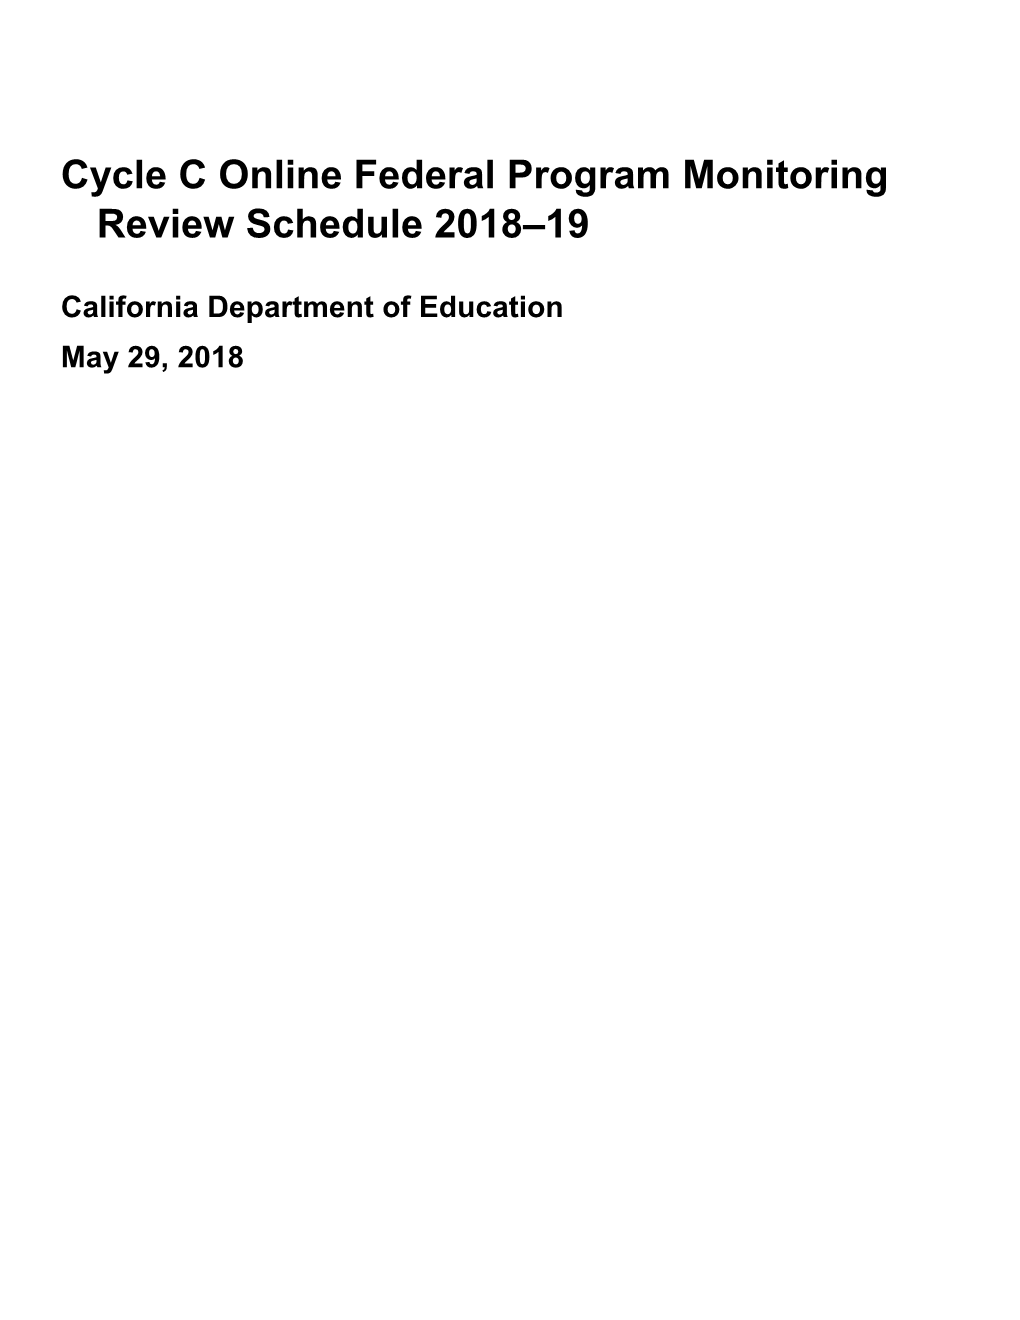 2018-19 Online Schedule - Compliance Monitoring (CA Dept of Education)